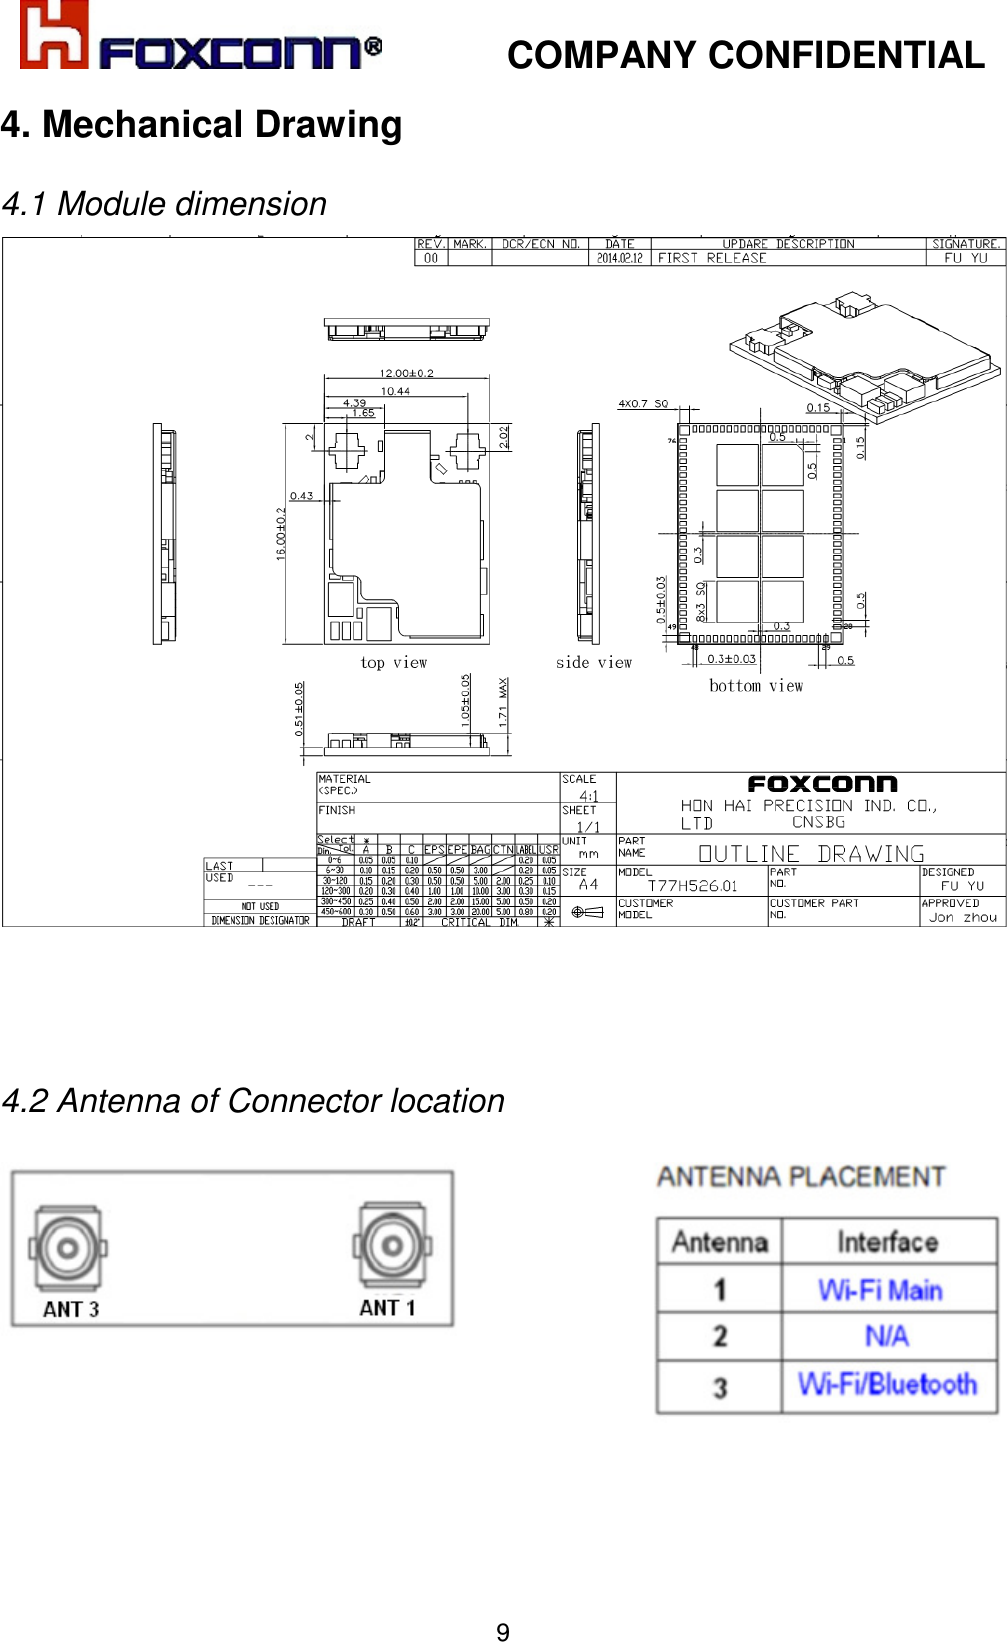            COMPANY CONFIDENTIAL   9 4. Mechanical Drawing  4.1 Module dimension     4.2 Antenna of Connector location        